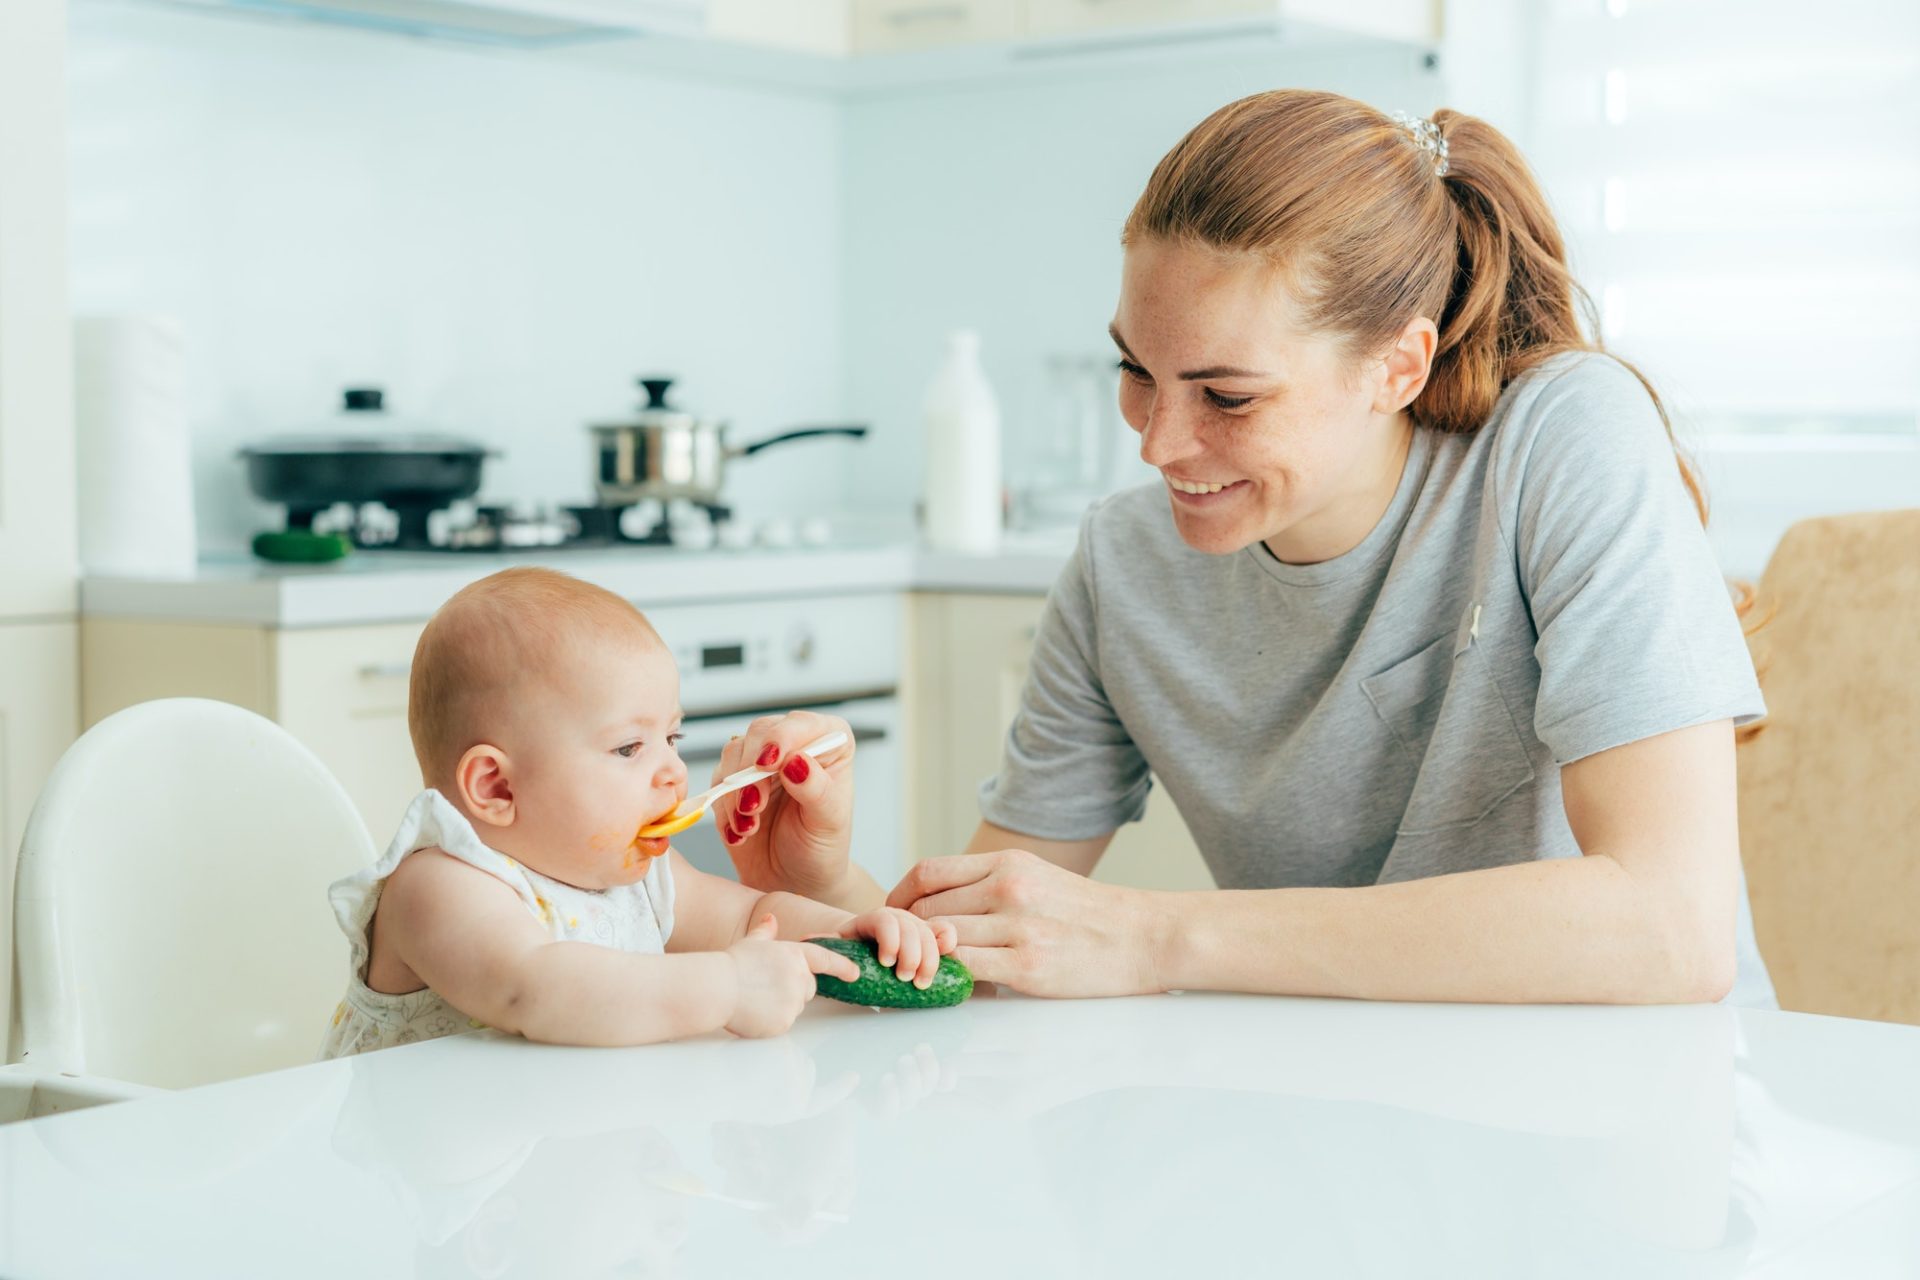 happy-smiling-redhead-mom-feeds-her-baby-with-vegetable-puree-in-the-kitchen-at-home--e1634610116620.jpg